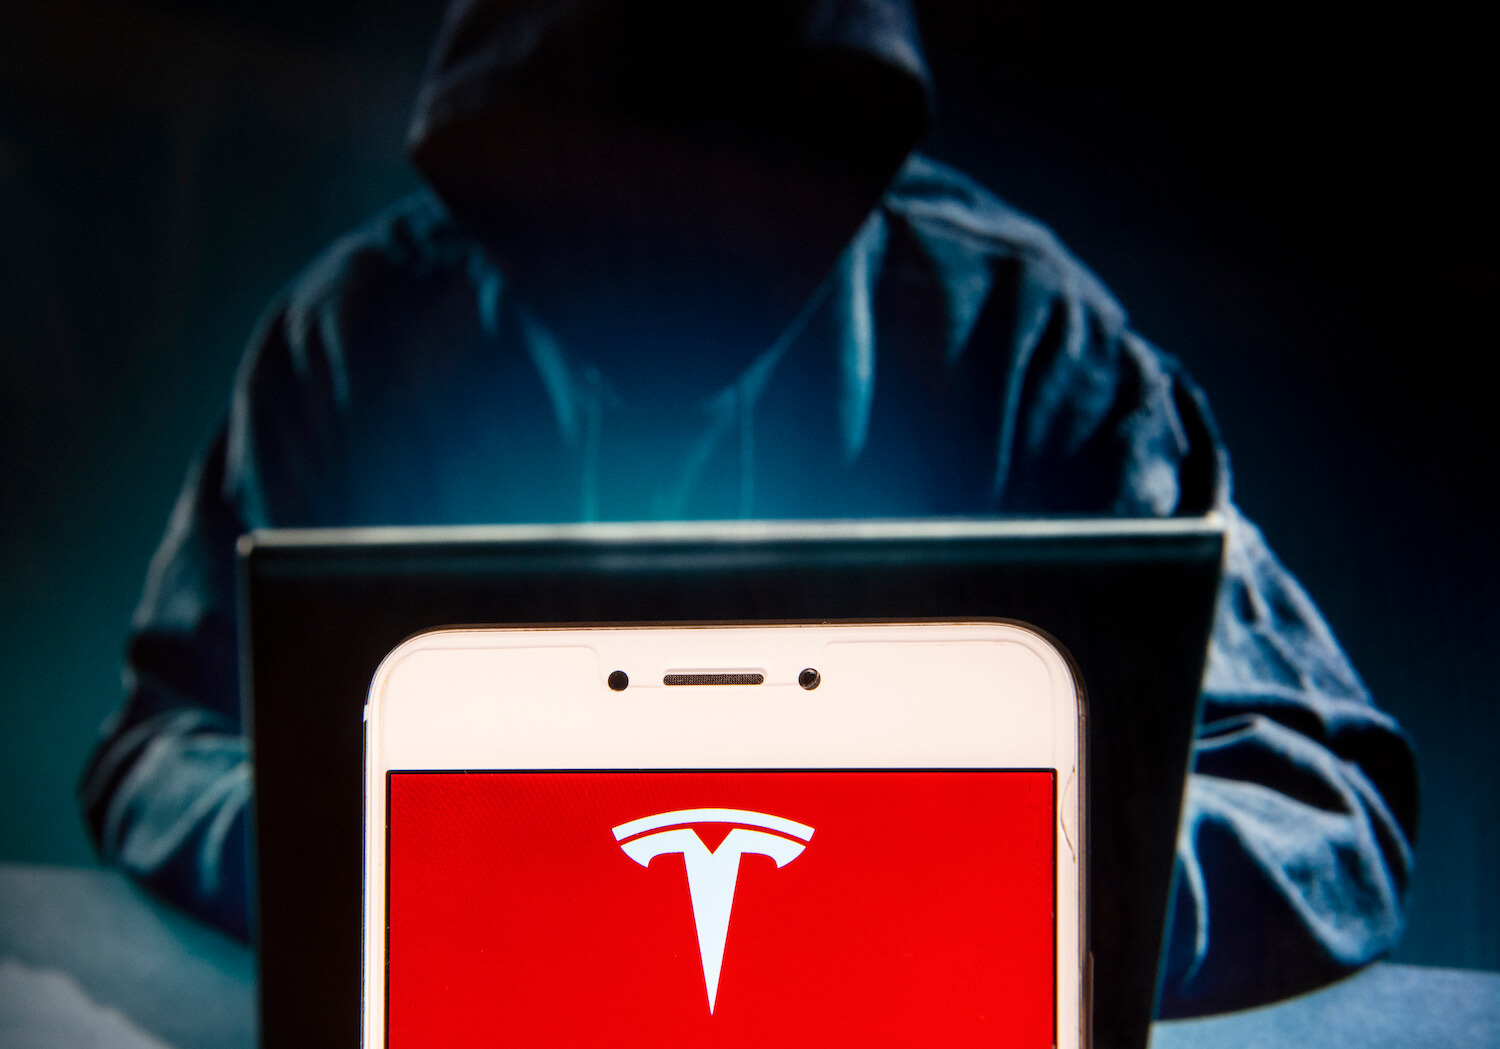 A person in a hoody types on a laptop in the background, while the Tesla logo is visible on a cellphone in the foreground.